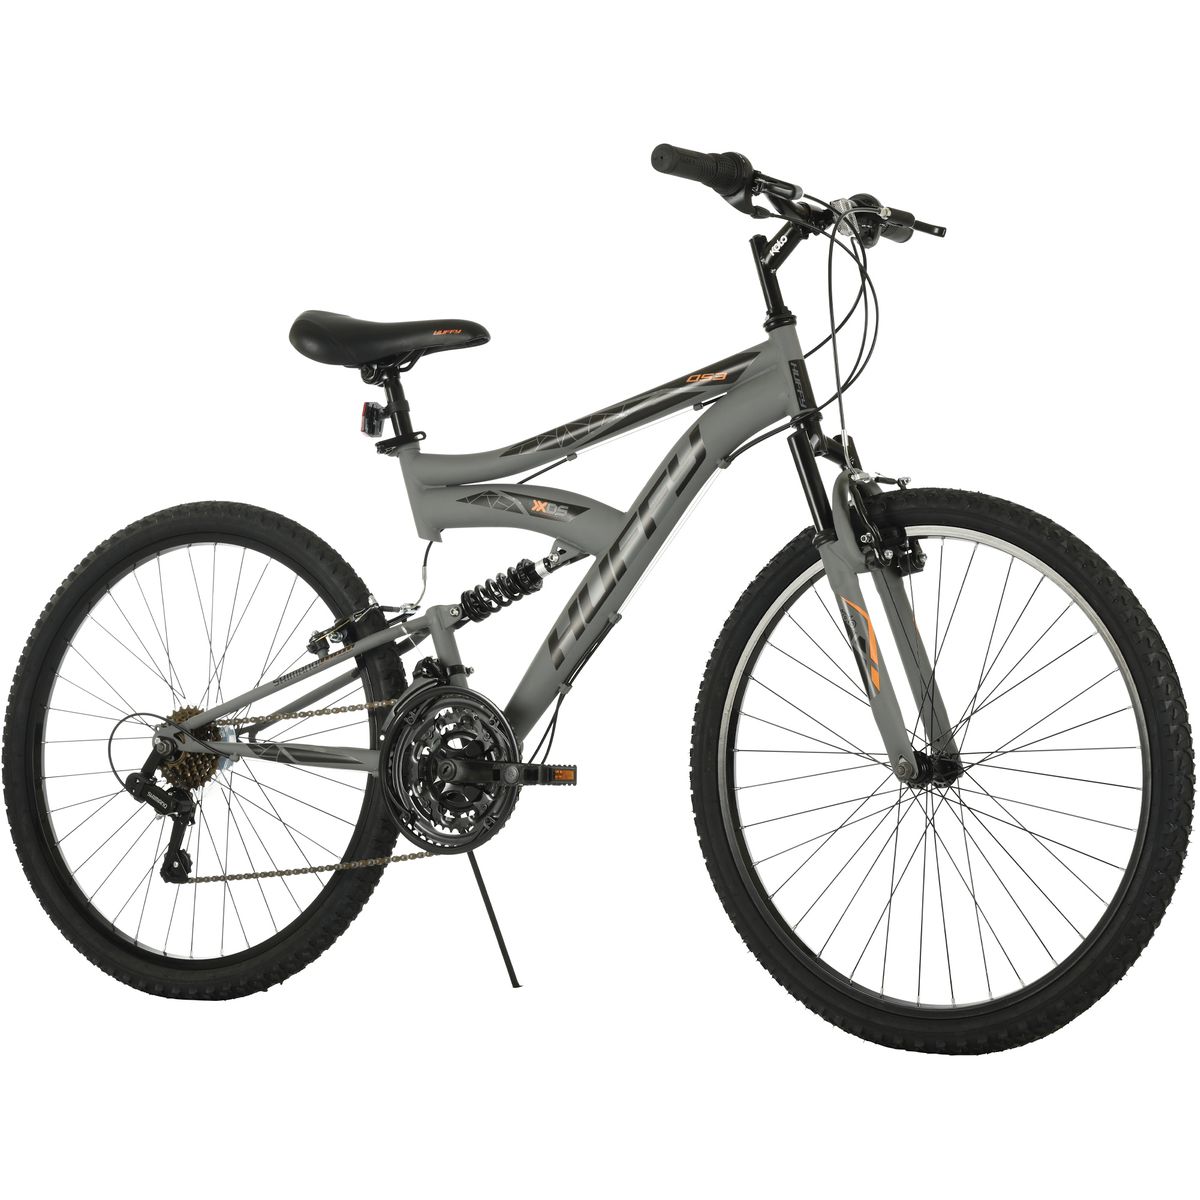 Huffy 26” Dual Suspension MTB Bicycle | Buy Online in South Africa ...